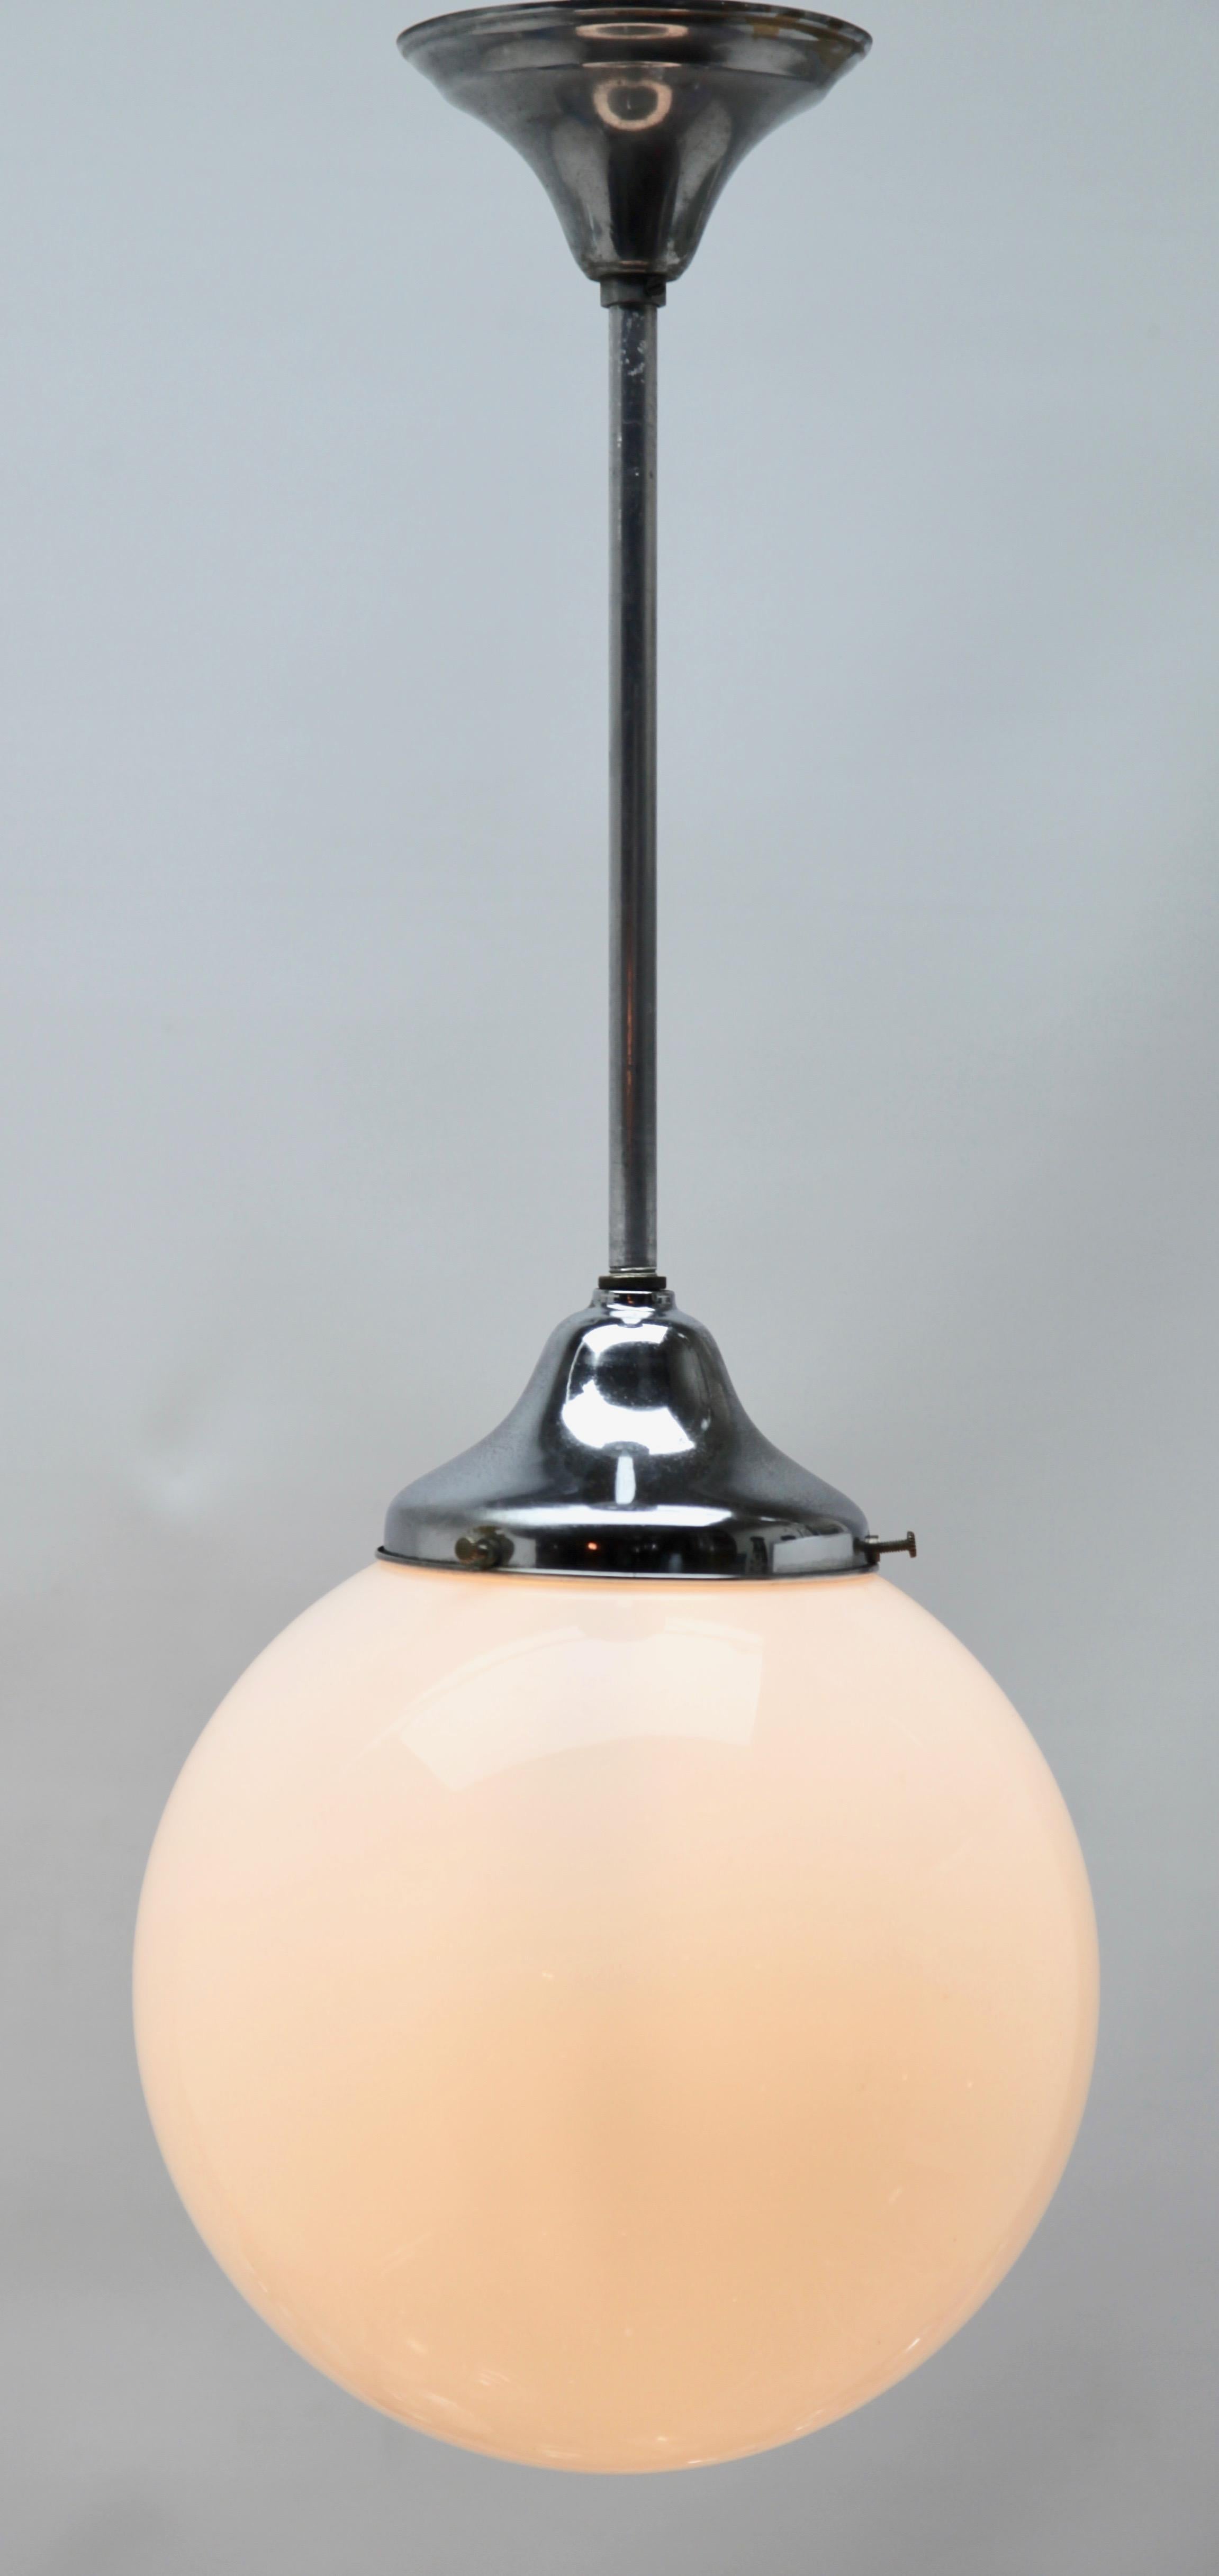 Blown Glass Phillips Pendant Stem Lamp with a Globular Opaline Shade, 1930s, Netherlands For Sale